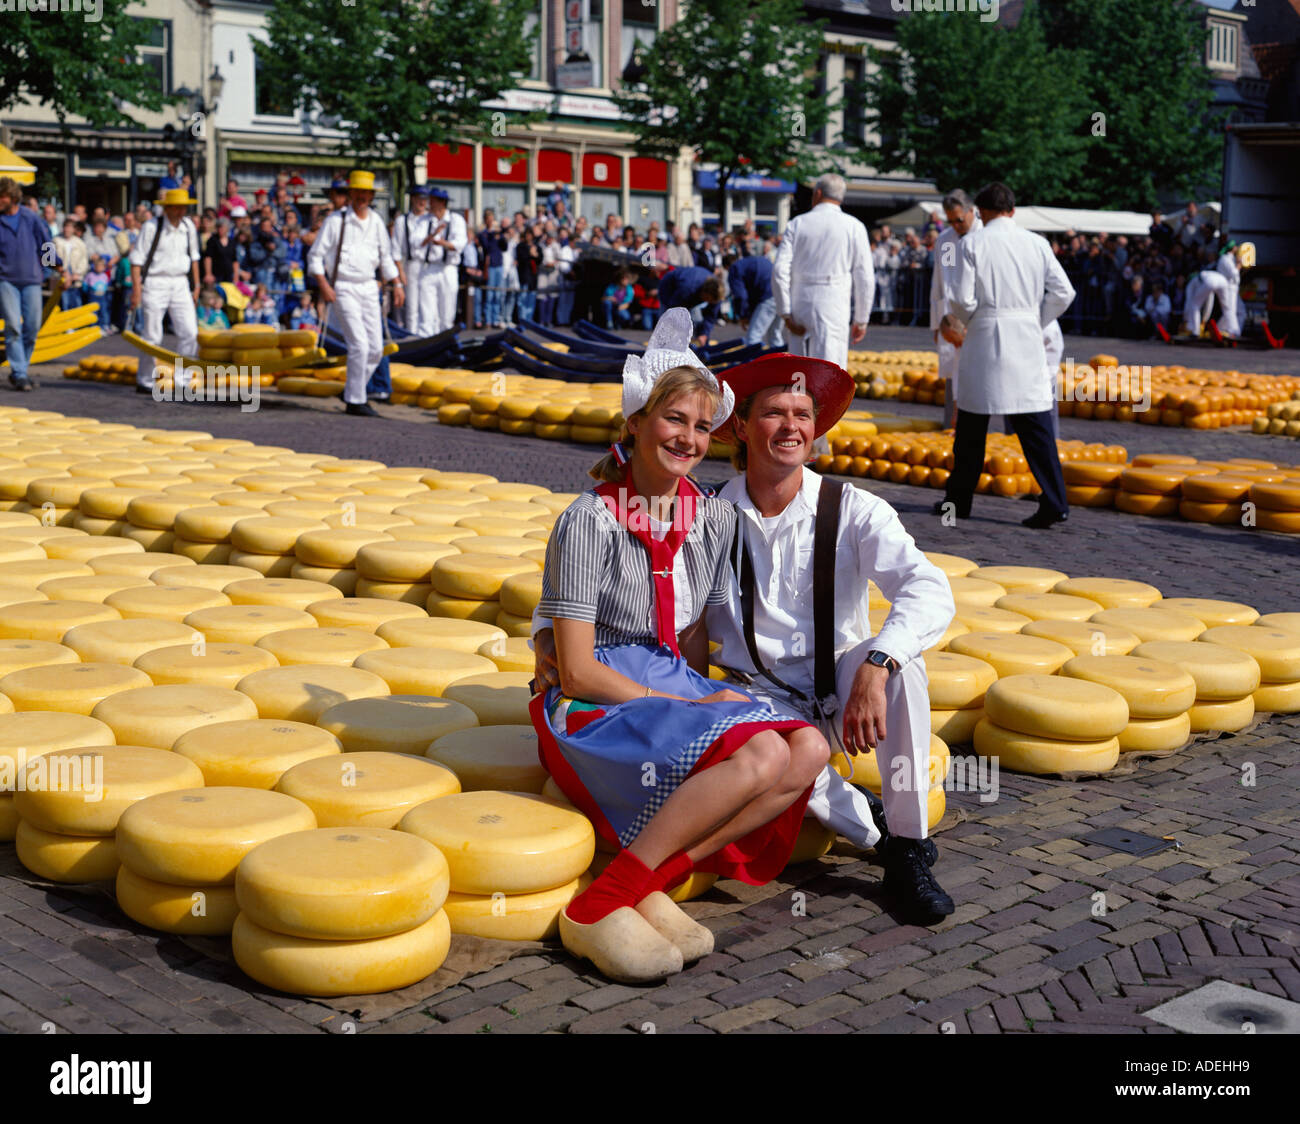 Netherlands. Alkmaar Cheese Market. Young couple in traditional clothes ...